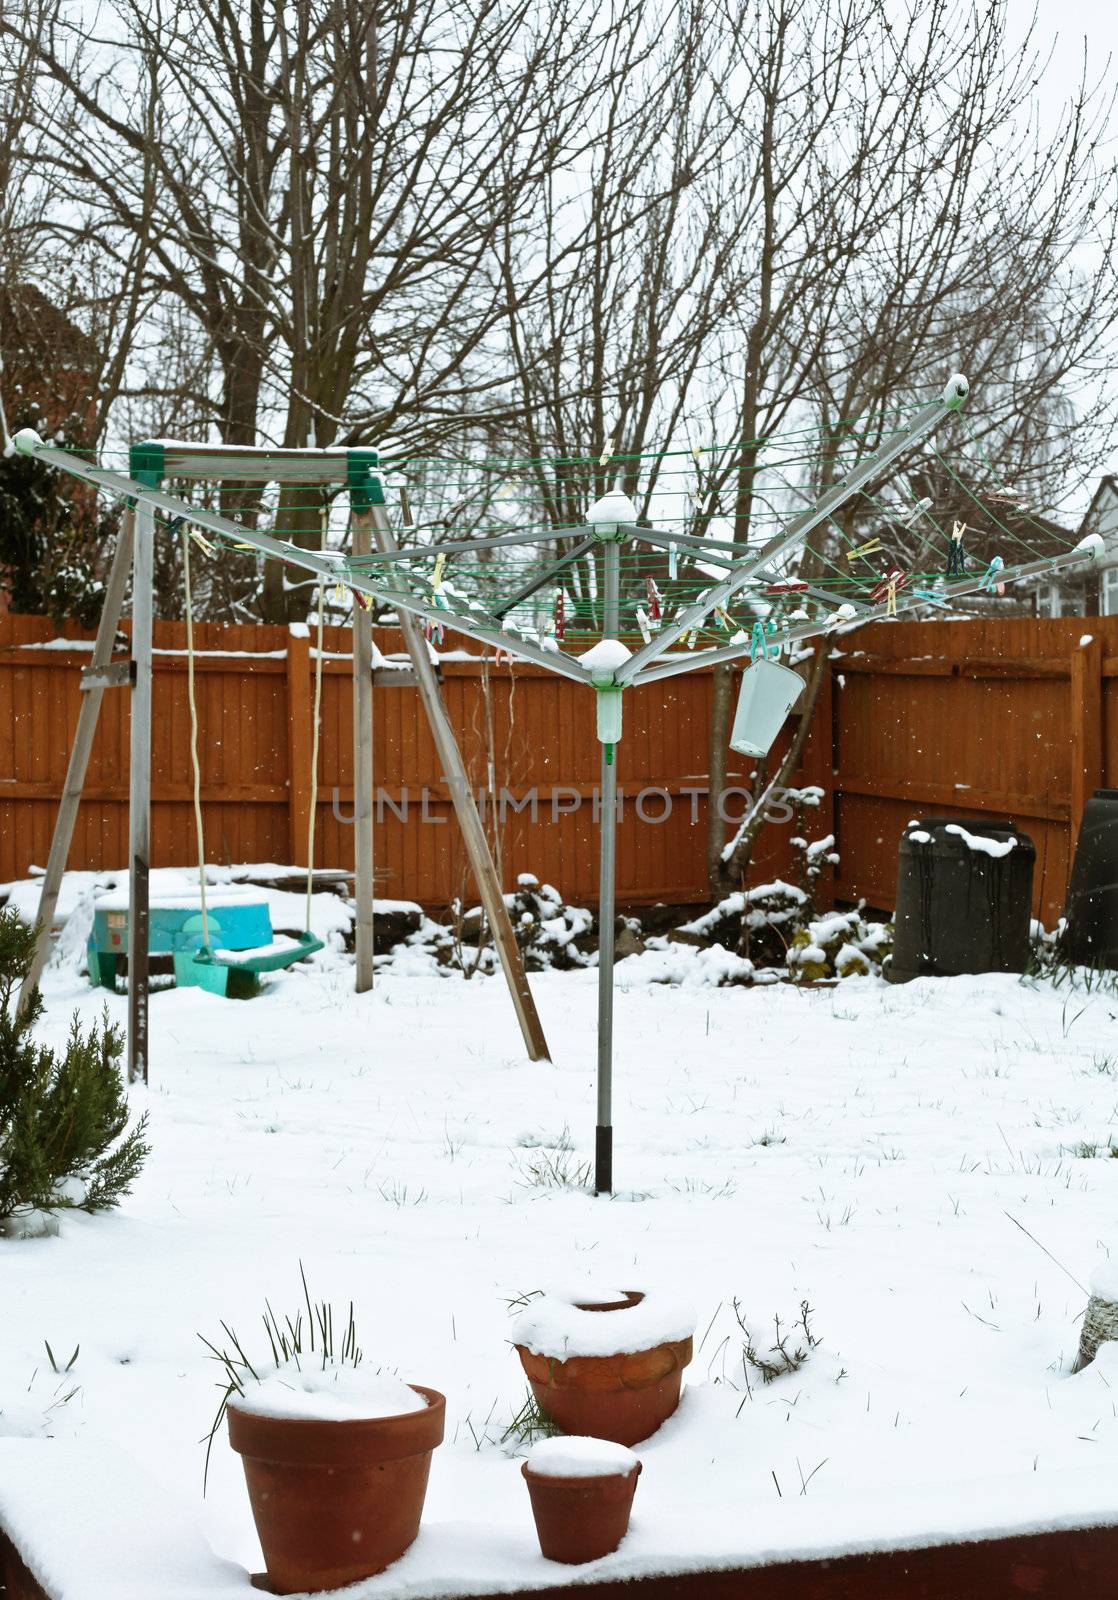 Snow falling in a home garden in the UK